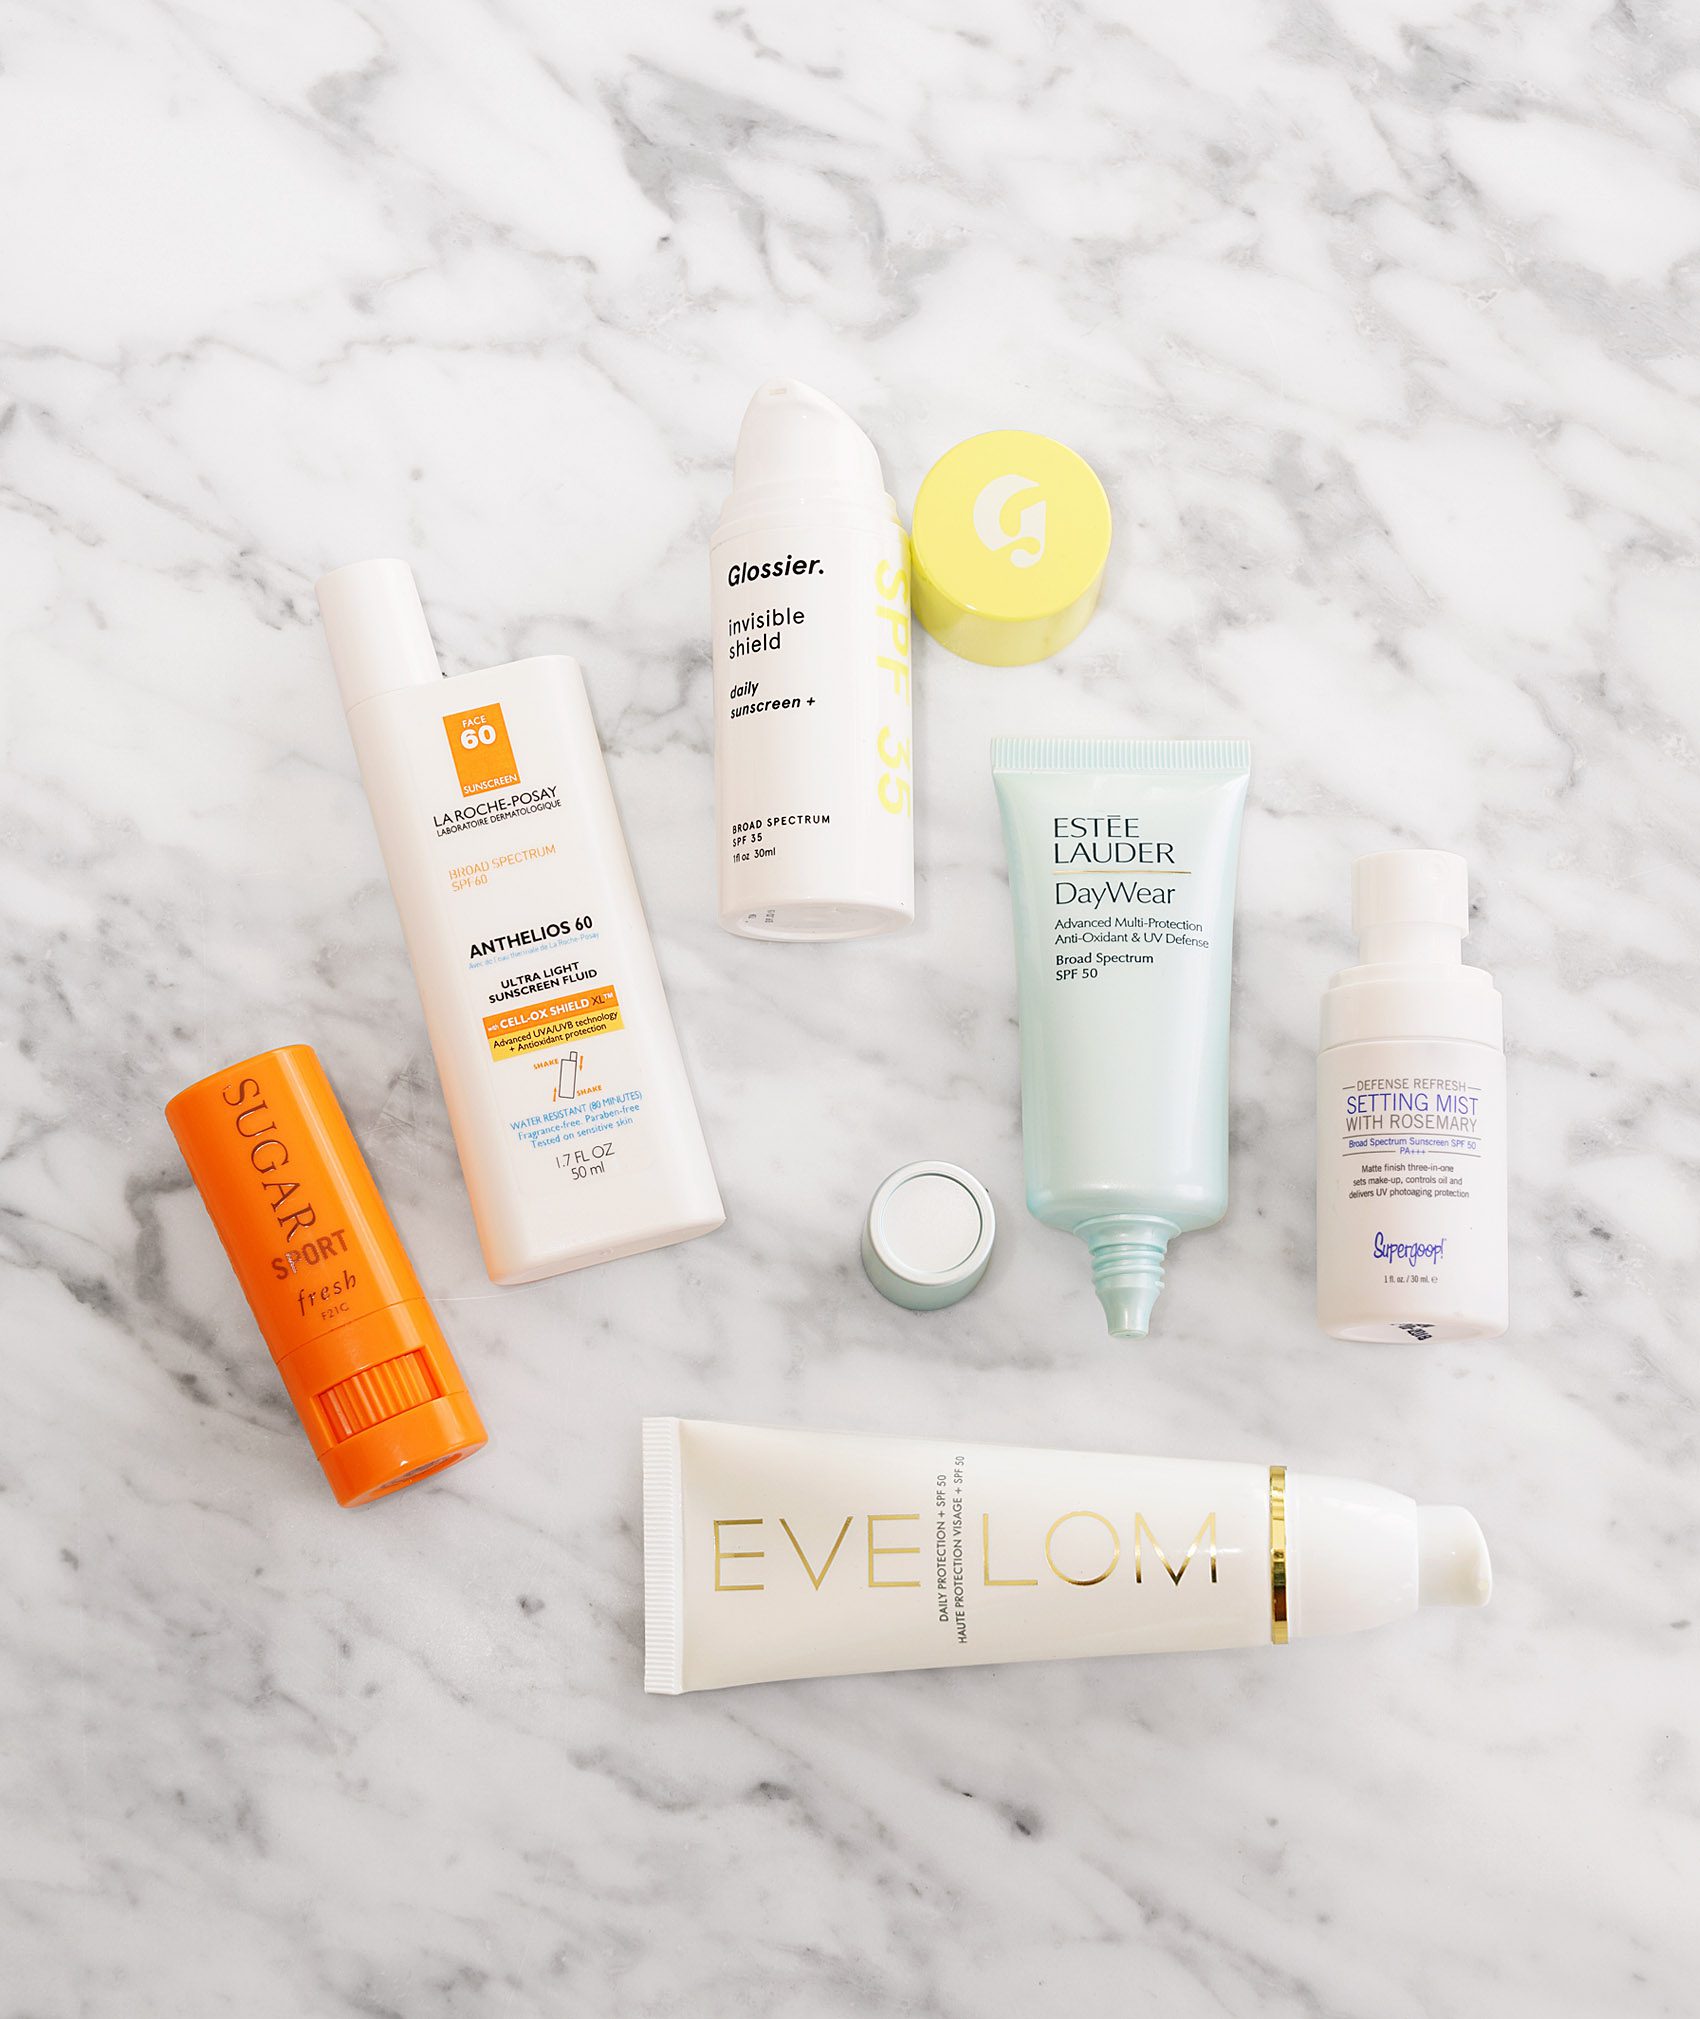 Sunscreen Archives - The Beauty Look Book